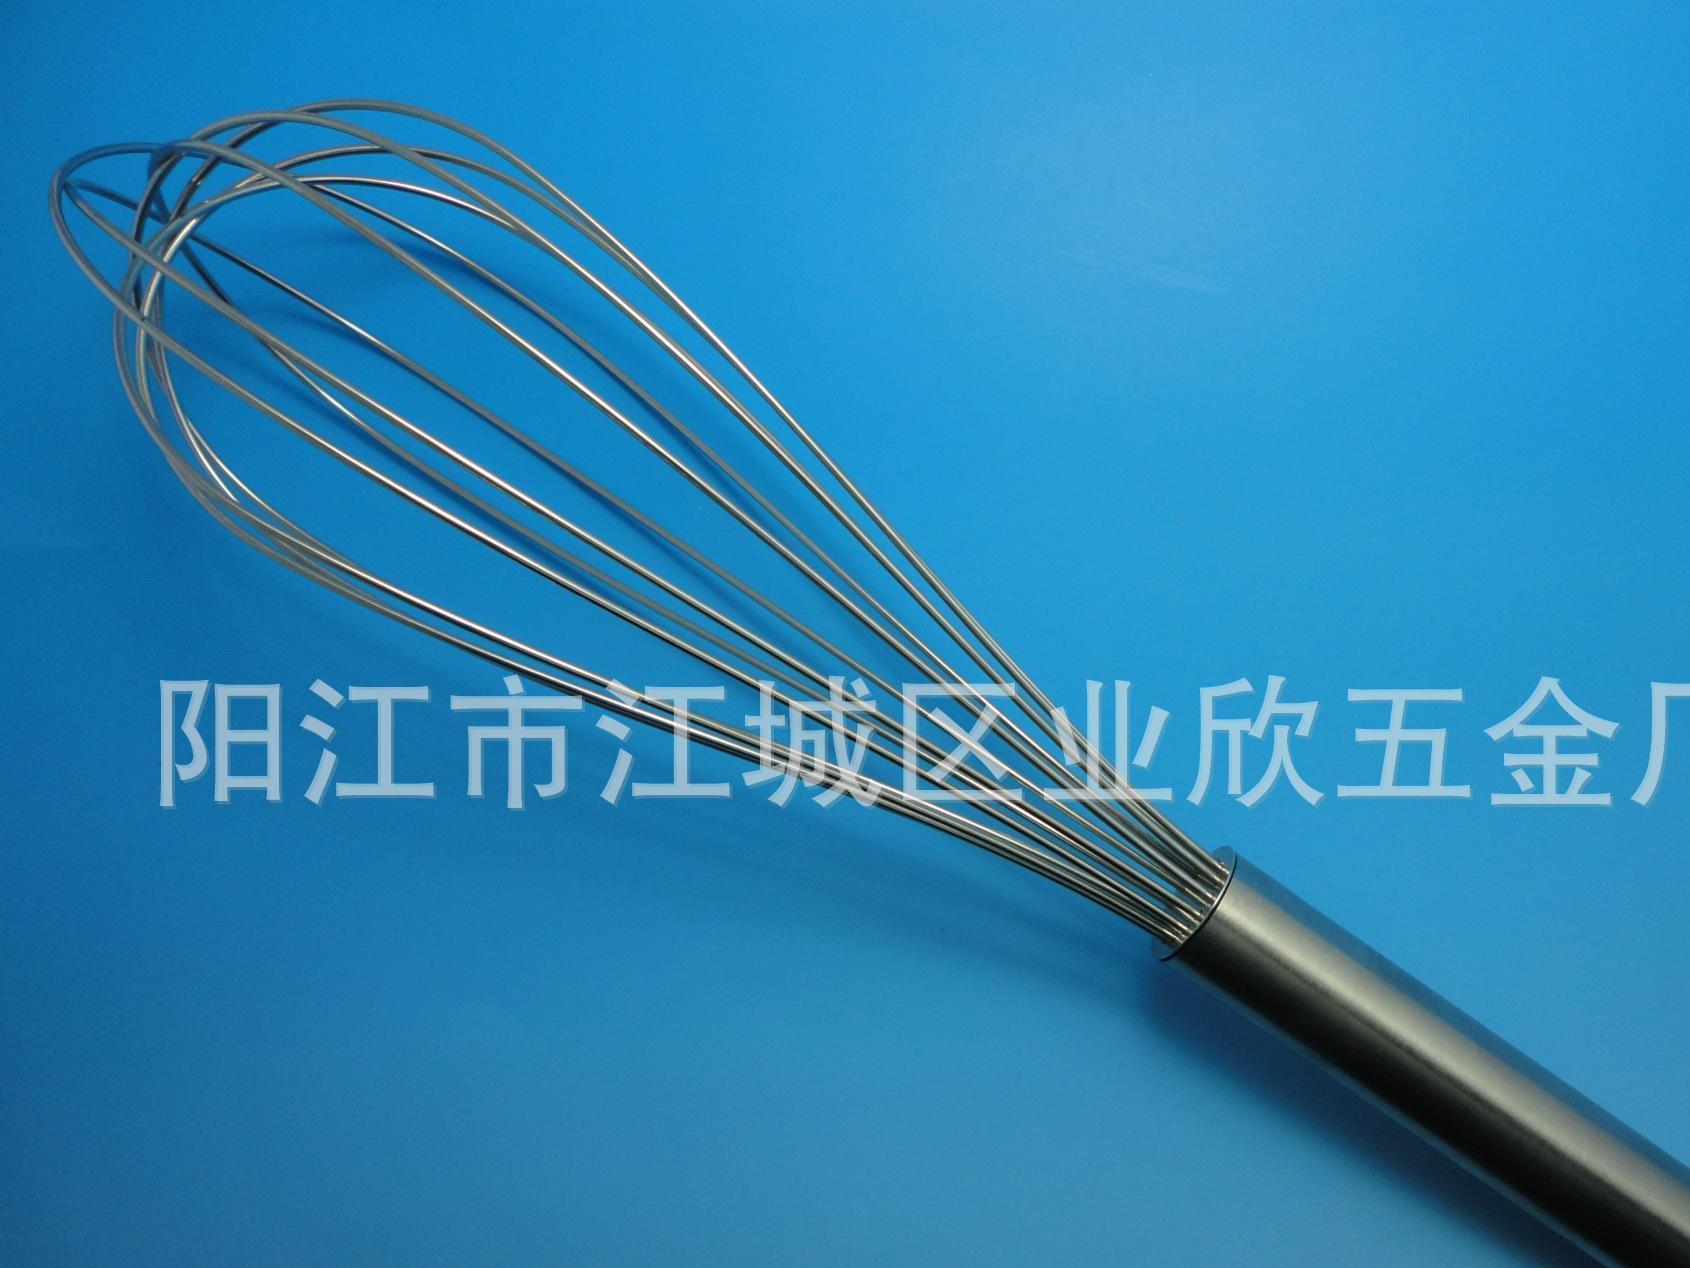 Manufacturer of 10 inch whisk stainless steel whisk egg beater baking tools